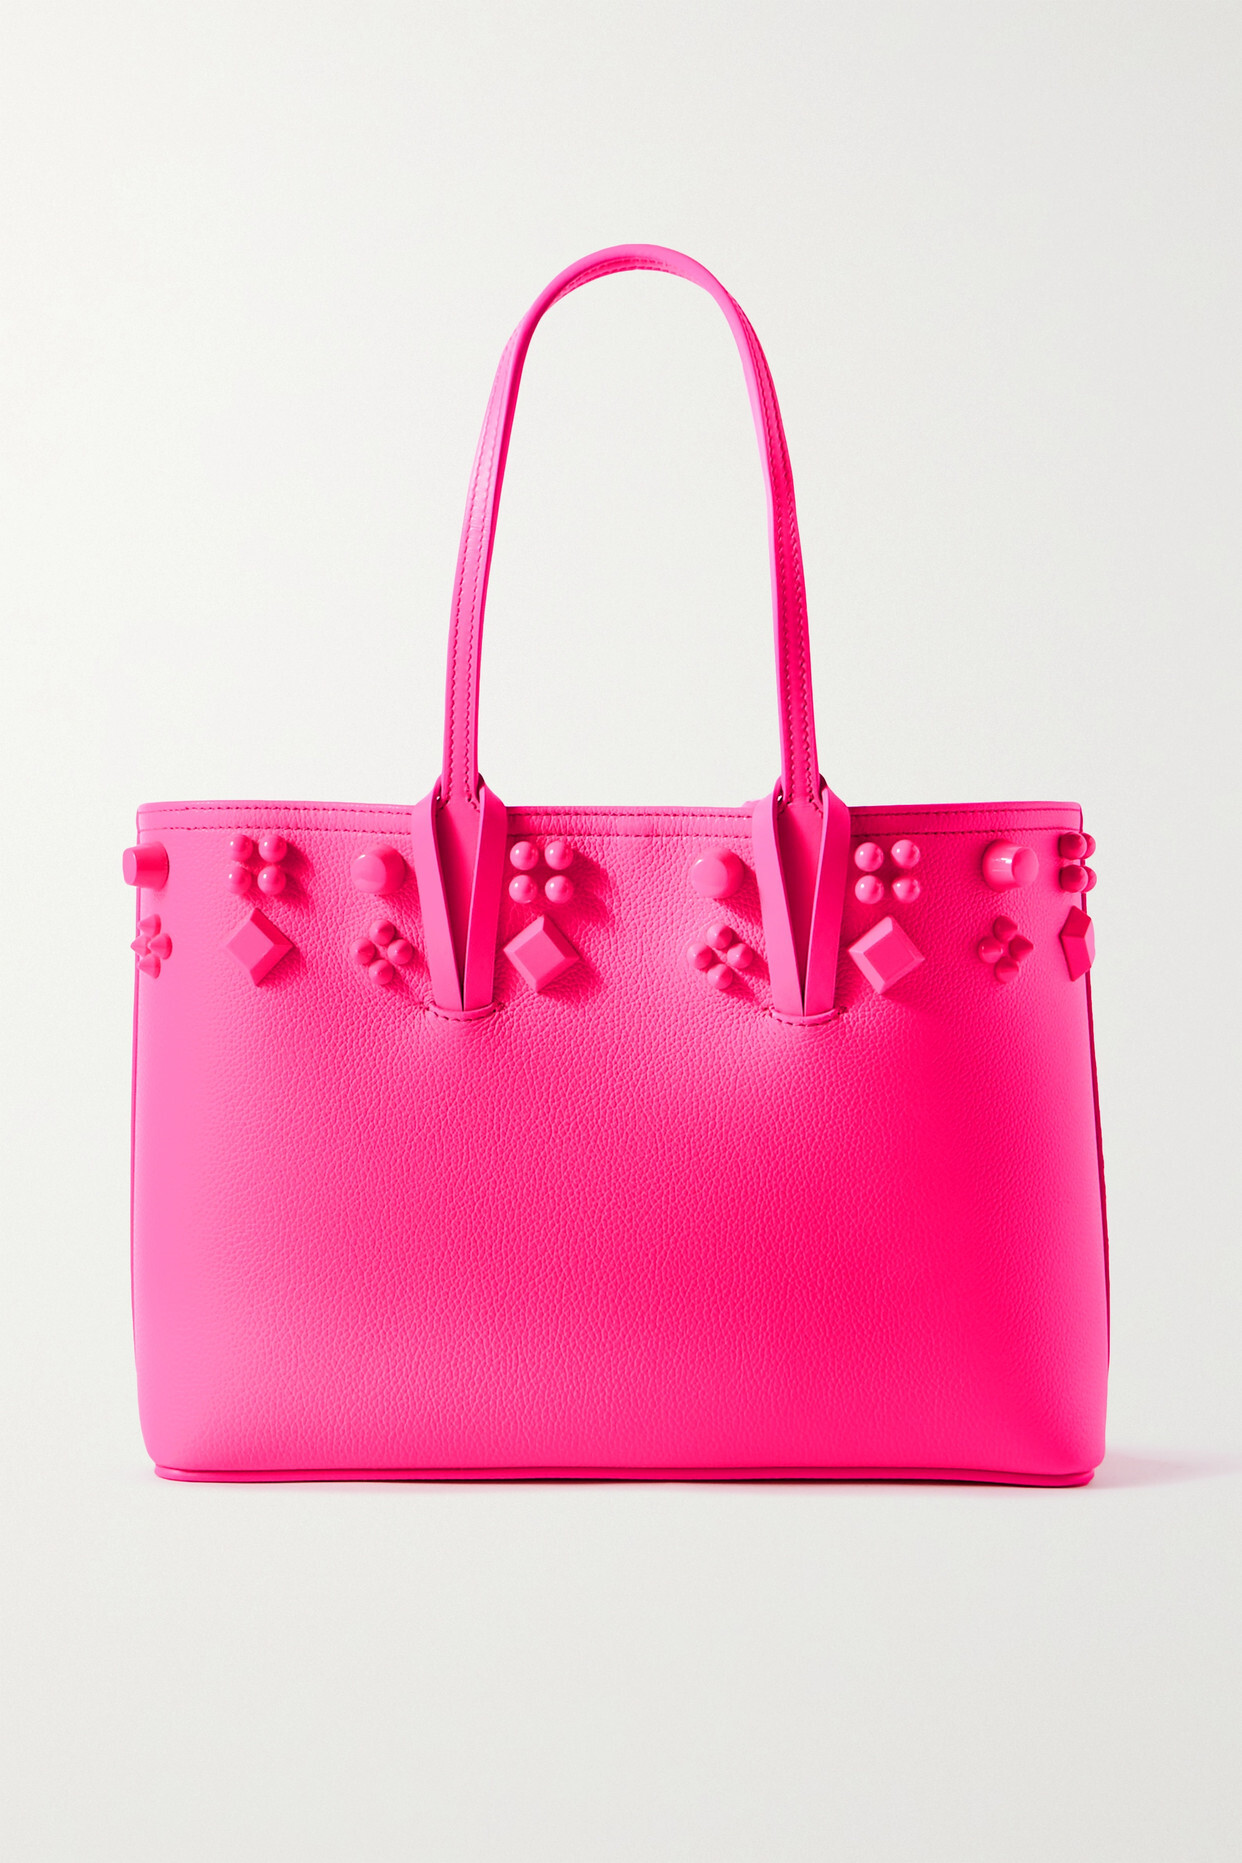 Christian Louboutin - Cabata Small Embellished Textured-leather Tote - Pink